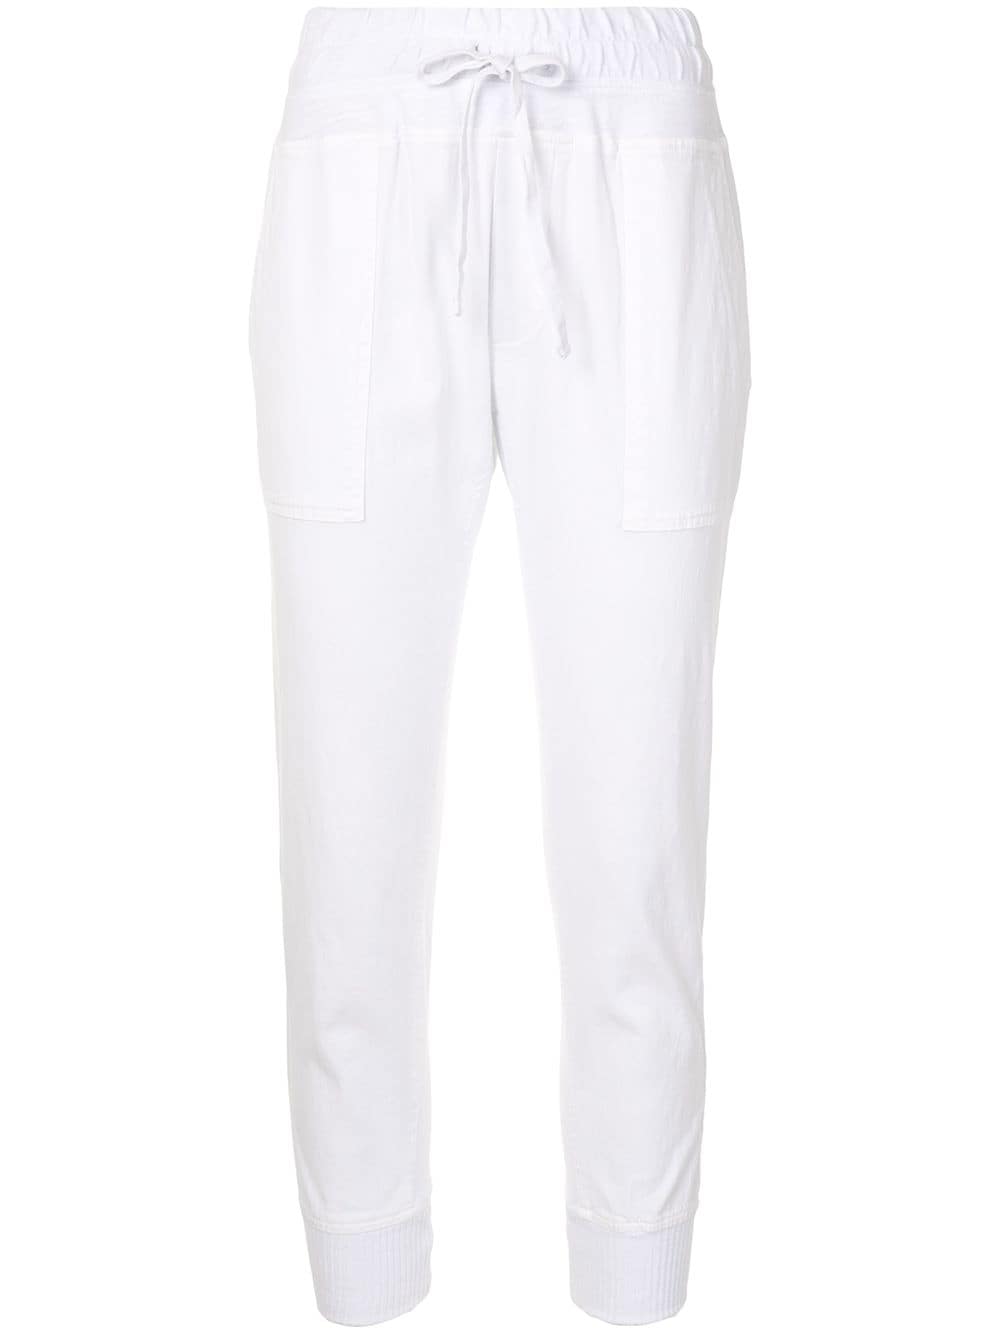 James Perse relaxed jersey trousers - White von James Perse